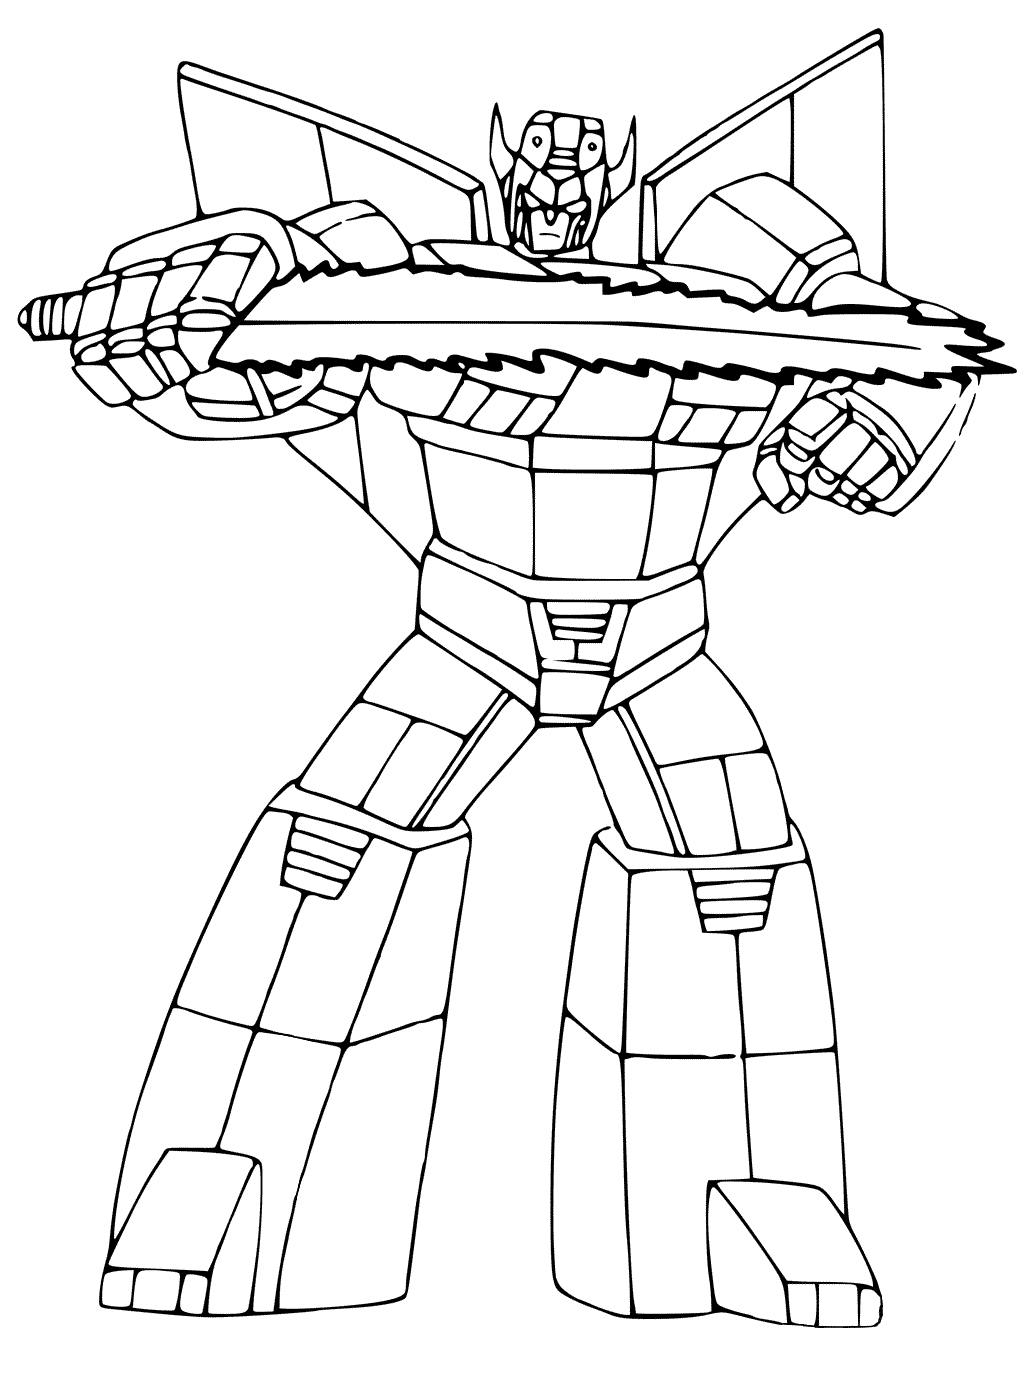 Voltron Coloring Pages Best Coloring Pages For Kids